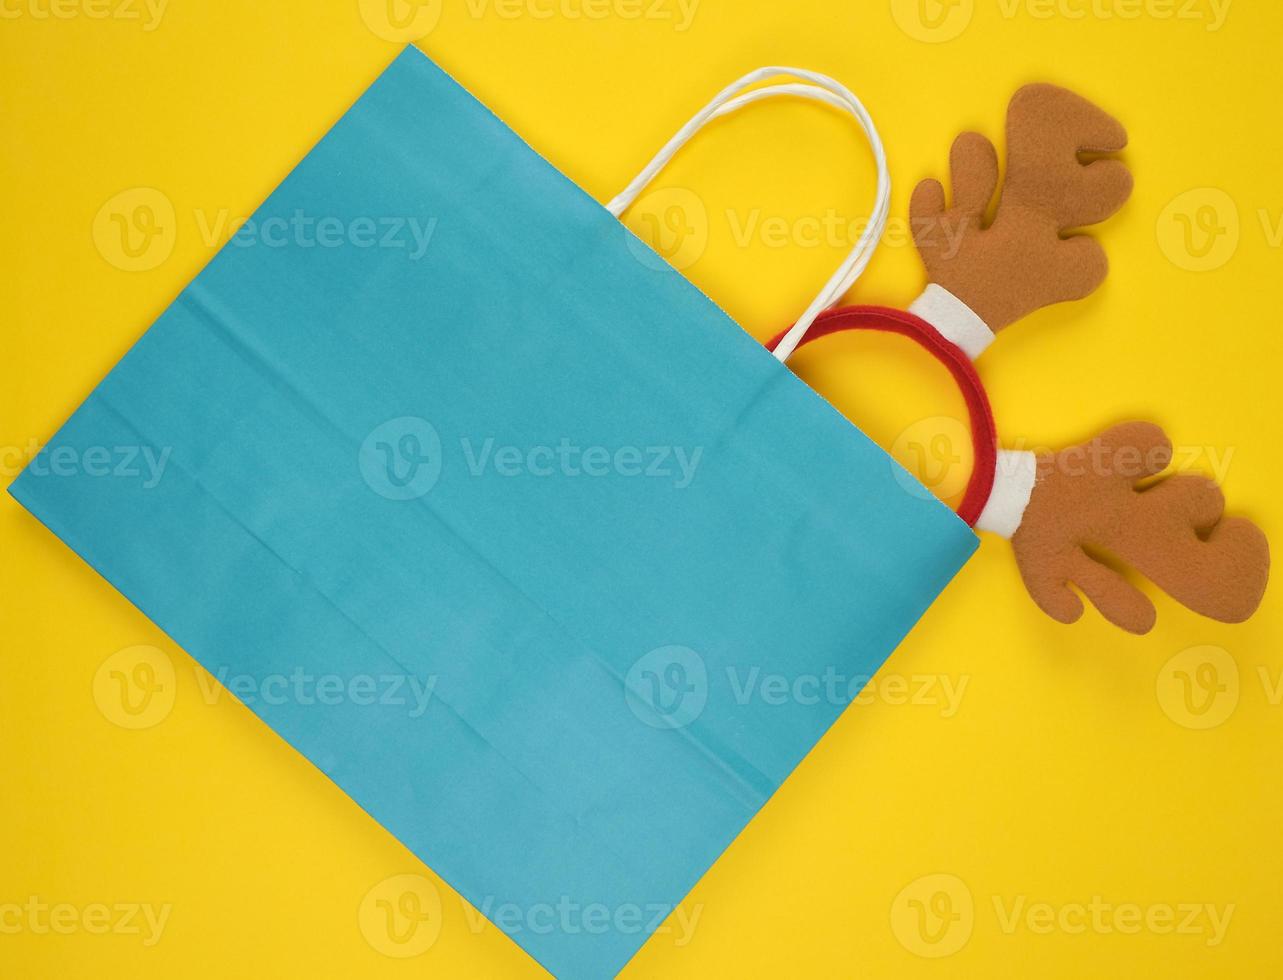 paper bags for shopping, inside the Christmas mask of a deer on a yellow background photo